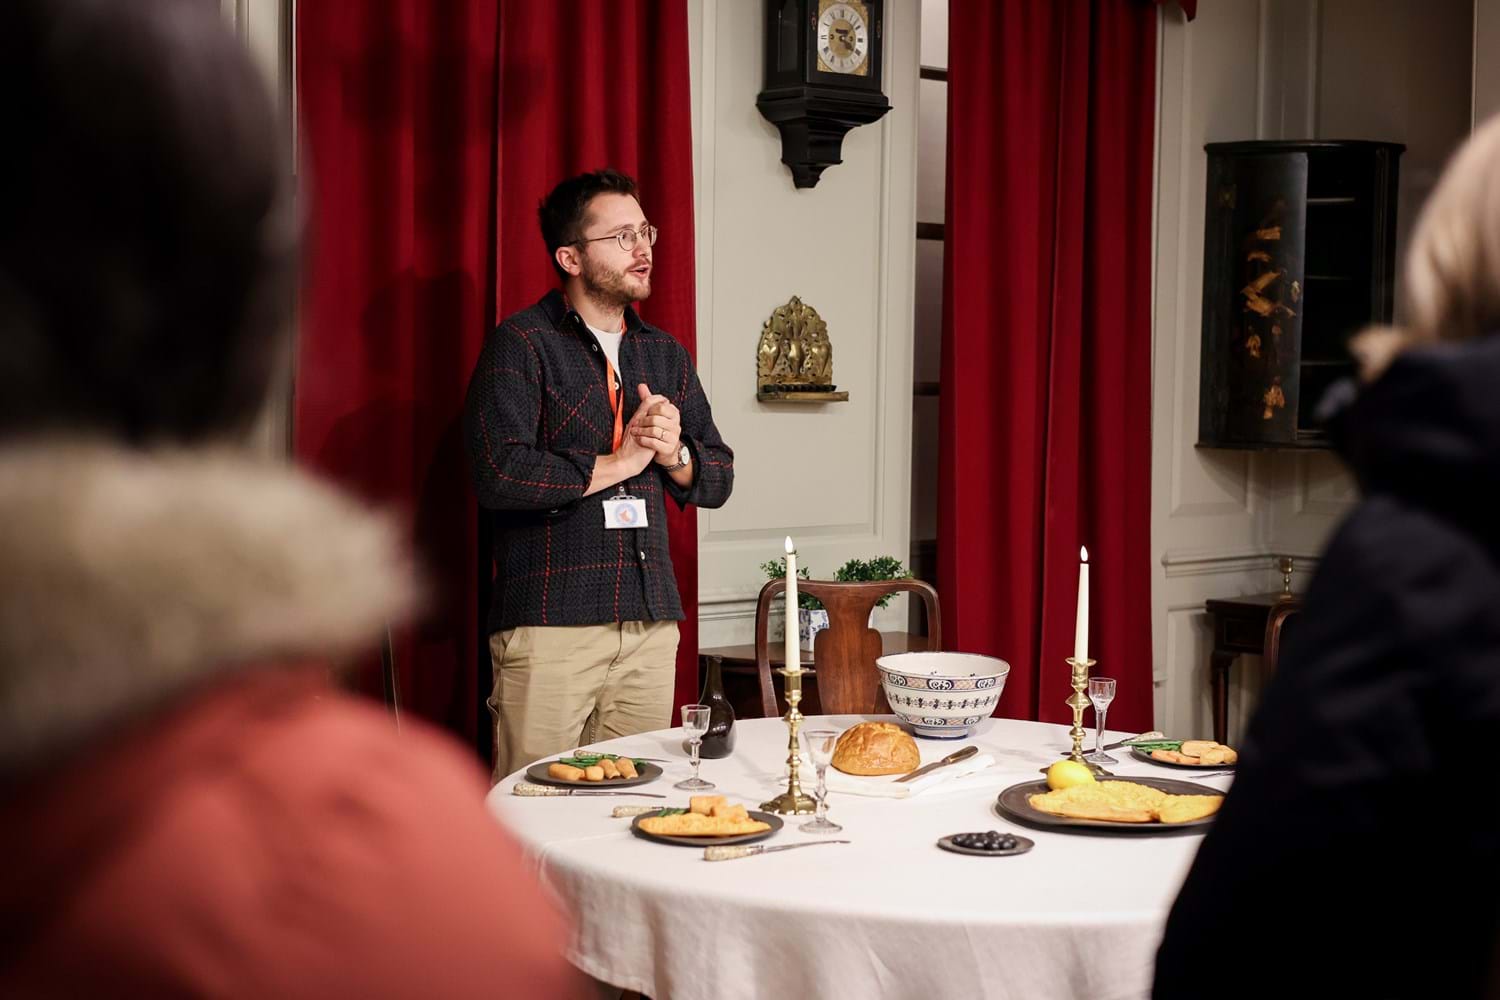 A person standing in front of a table set with foods for a candle lit supper while speaking to an audience